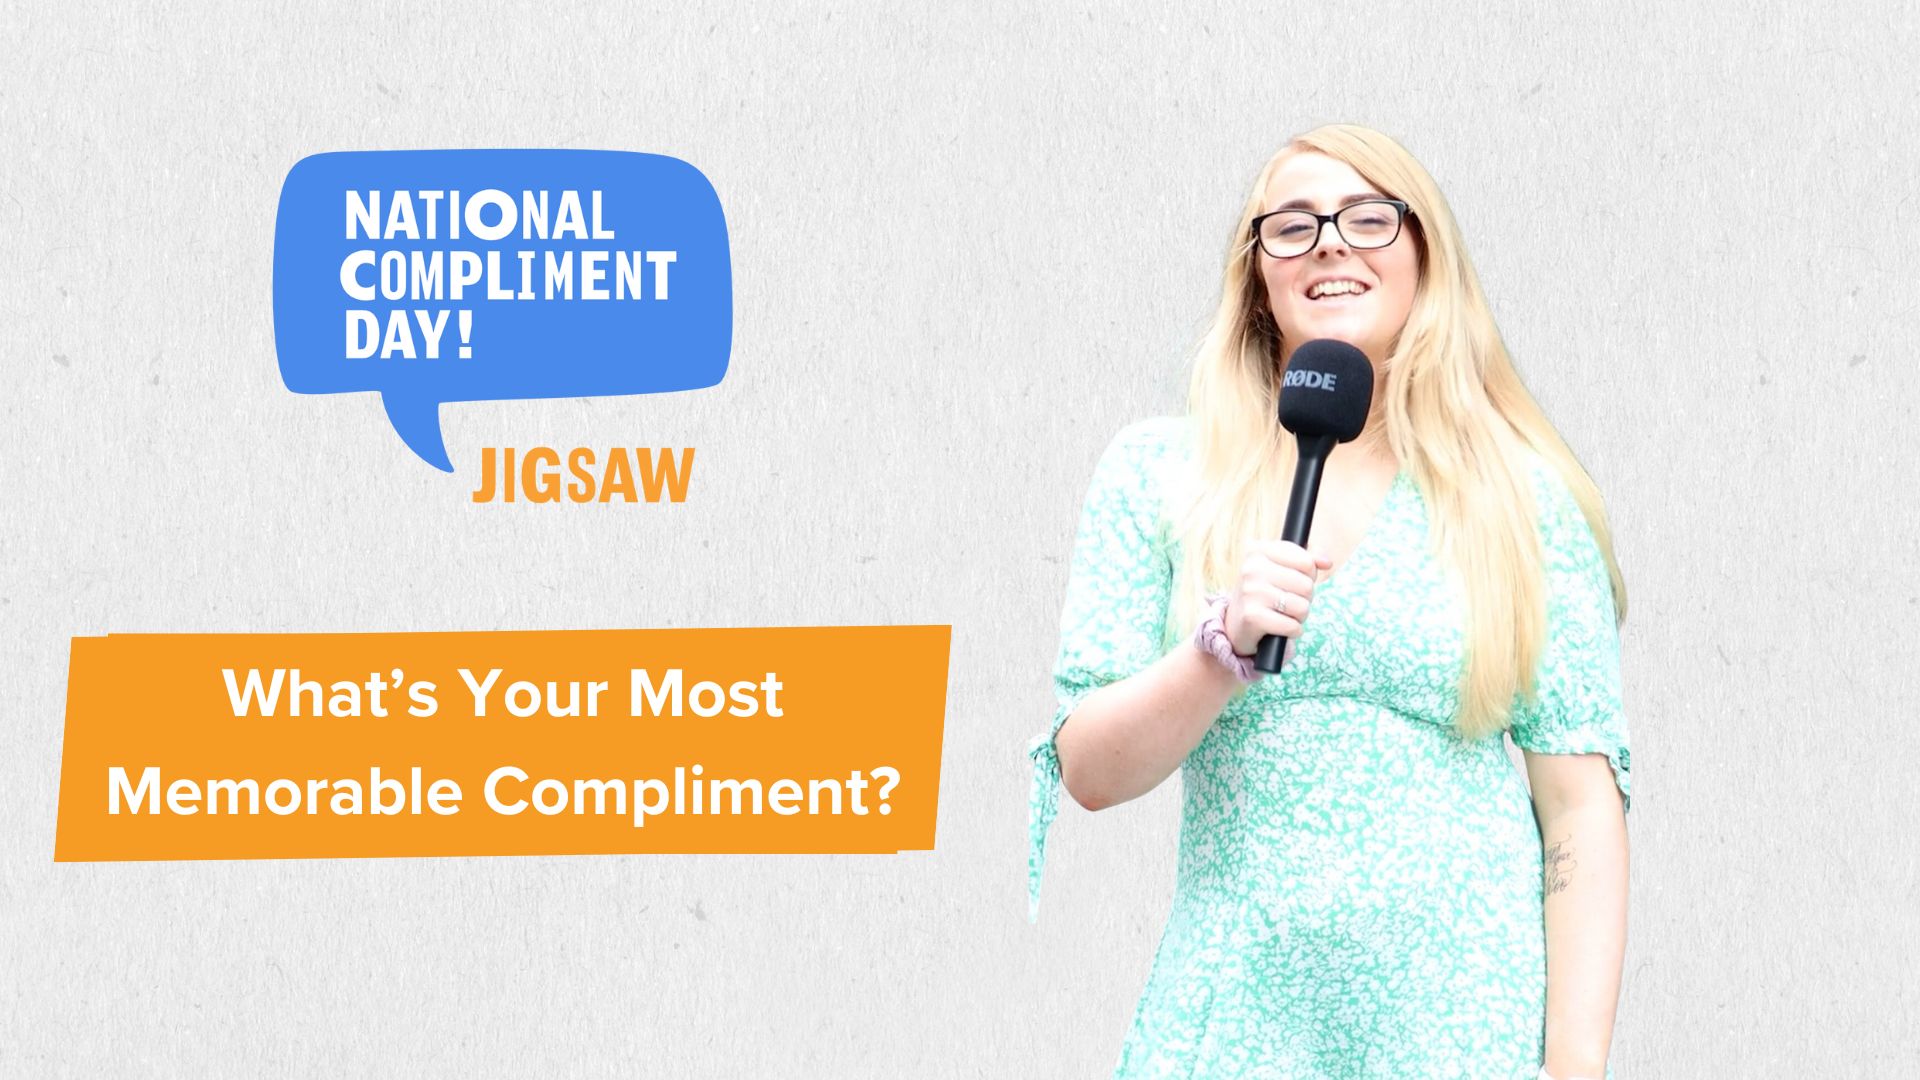 Compliment day